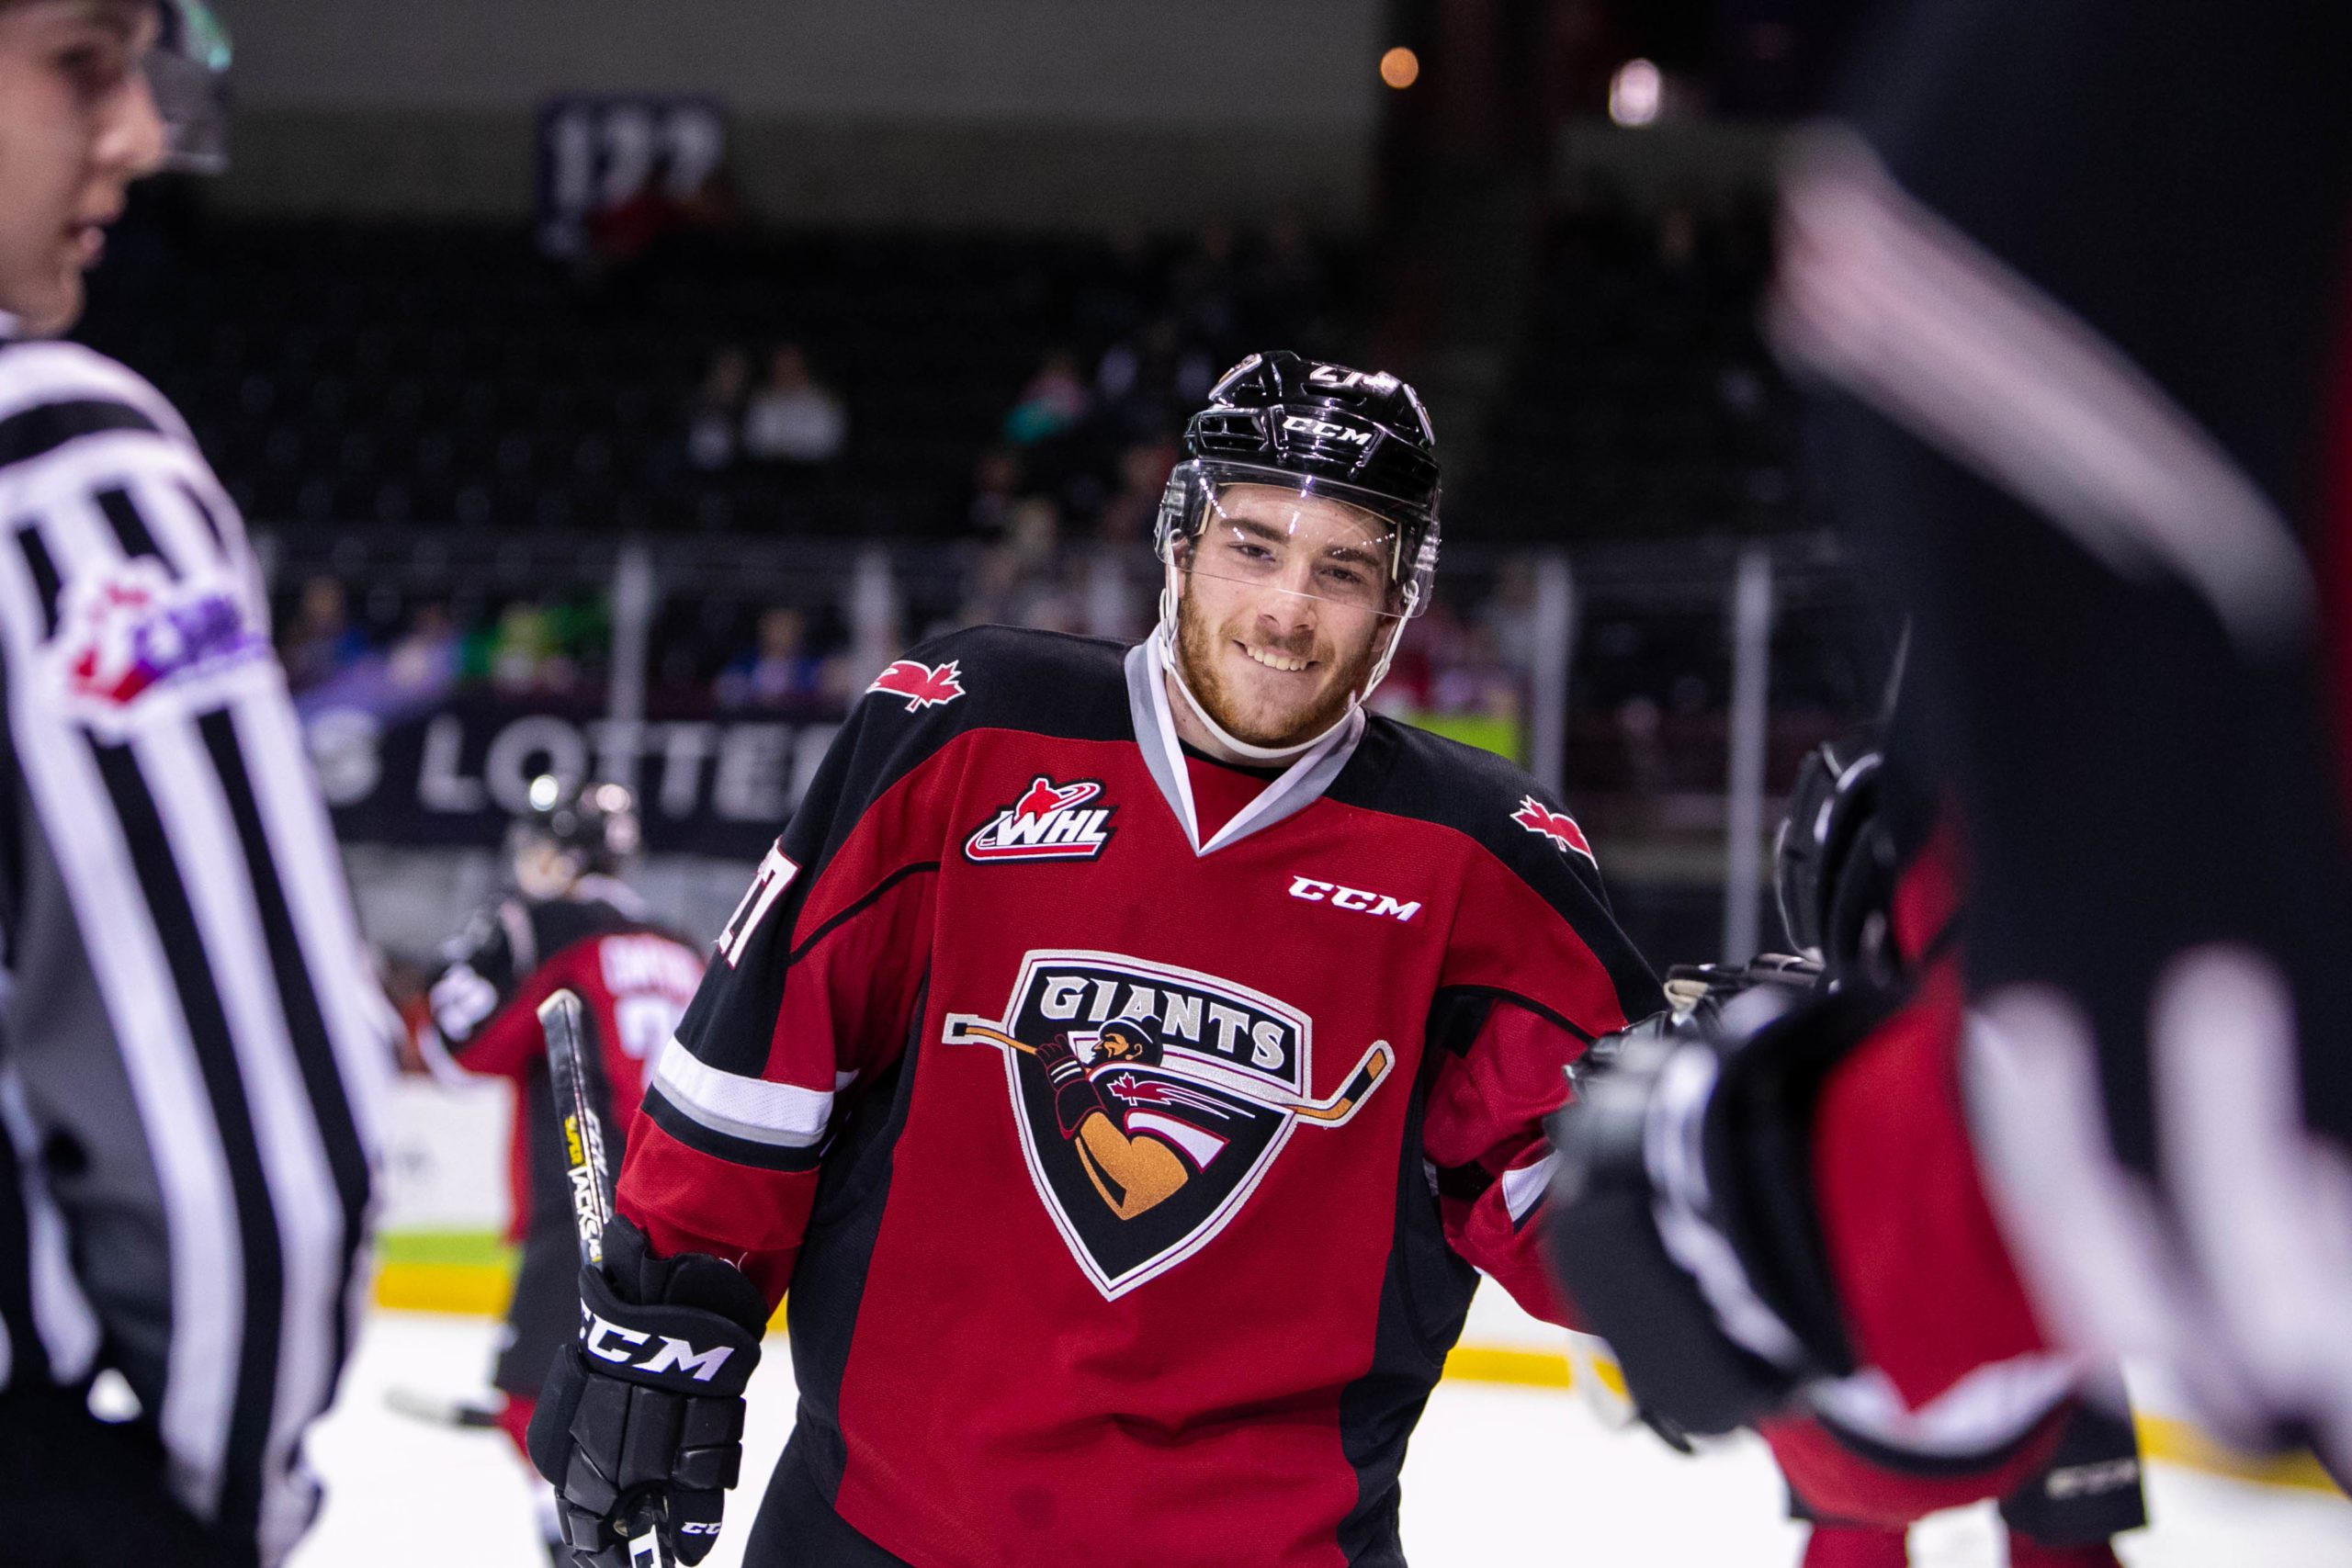 Seth Bafaro, formerly of the Vancouver Giants (Image: Larry Brunt)